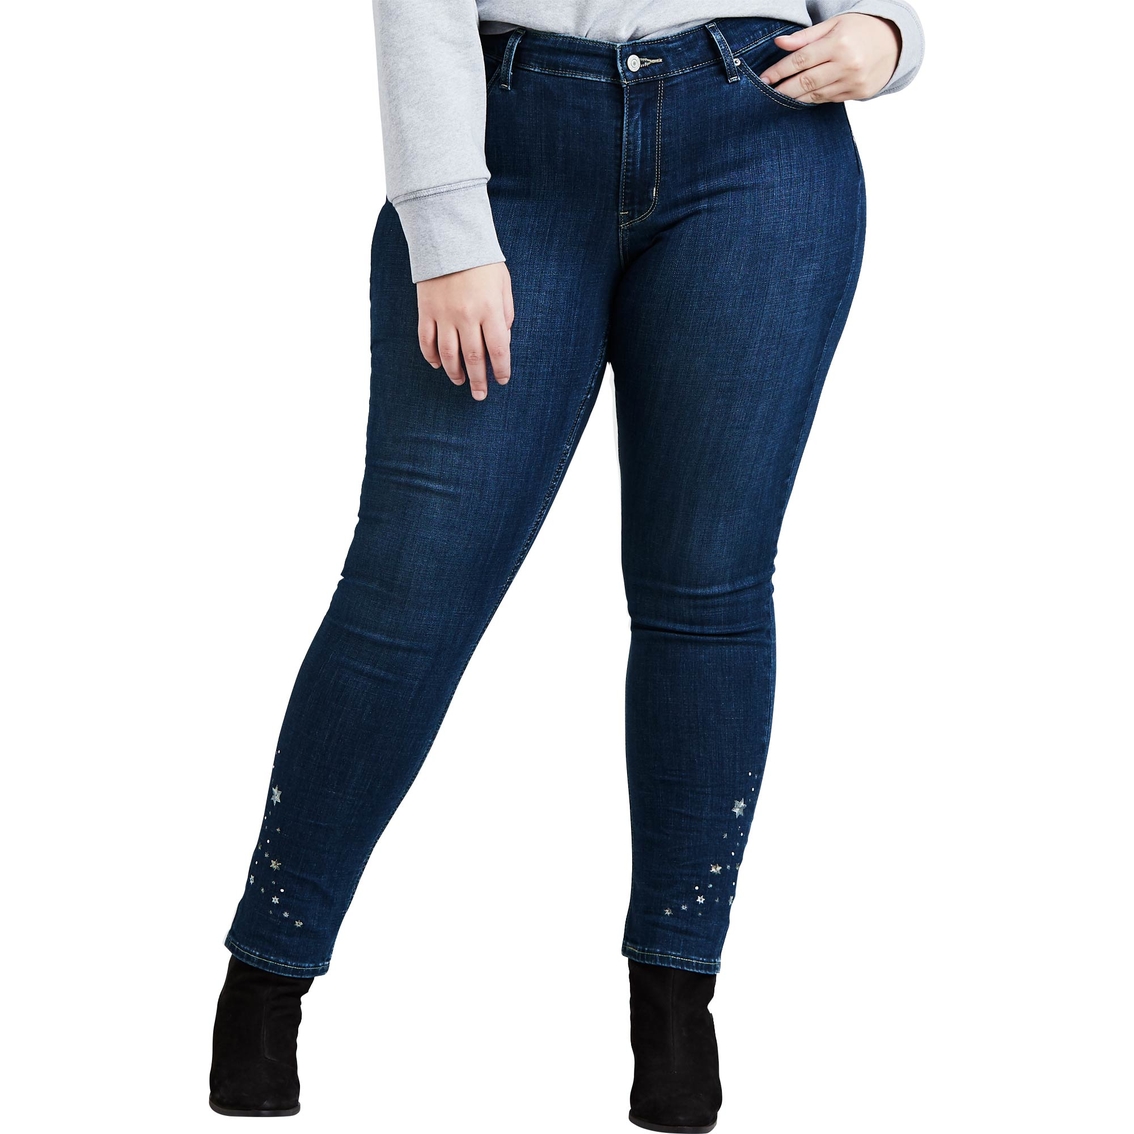 Levi's Plus Size 711 Skinny Jeans | Jeans | Clothing & Accessories ...